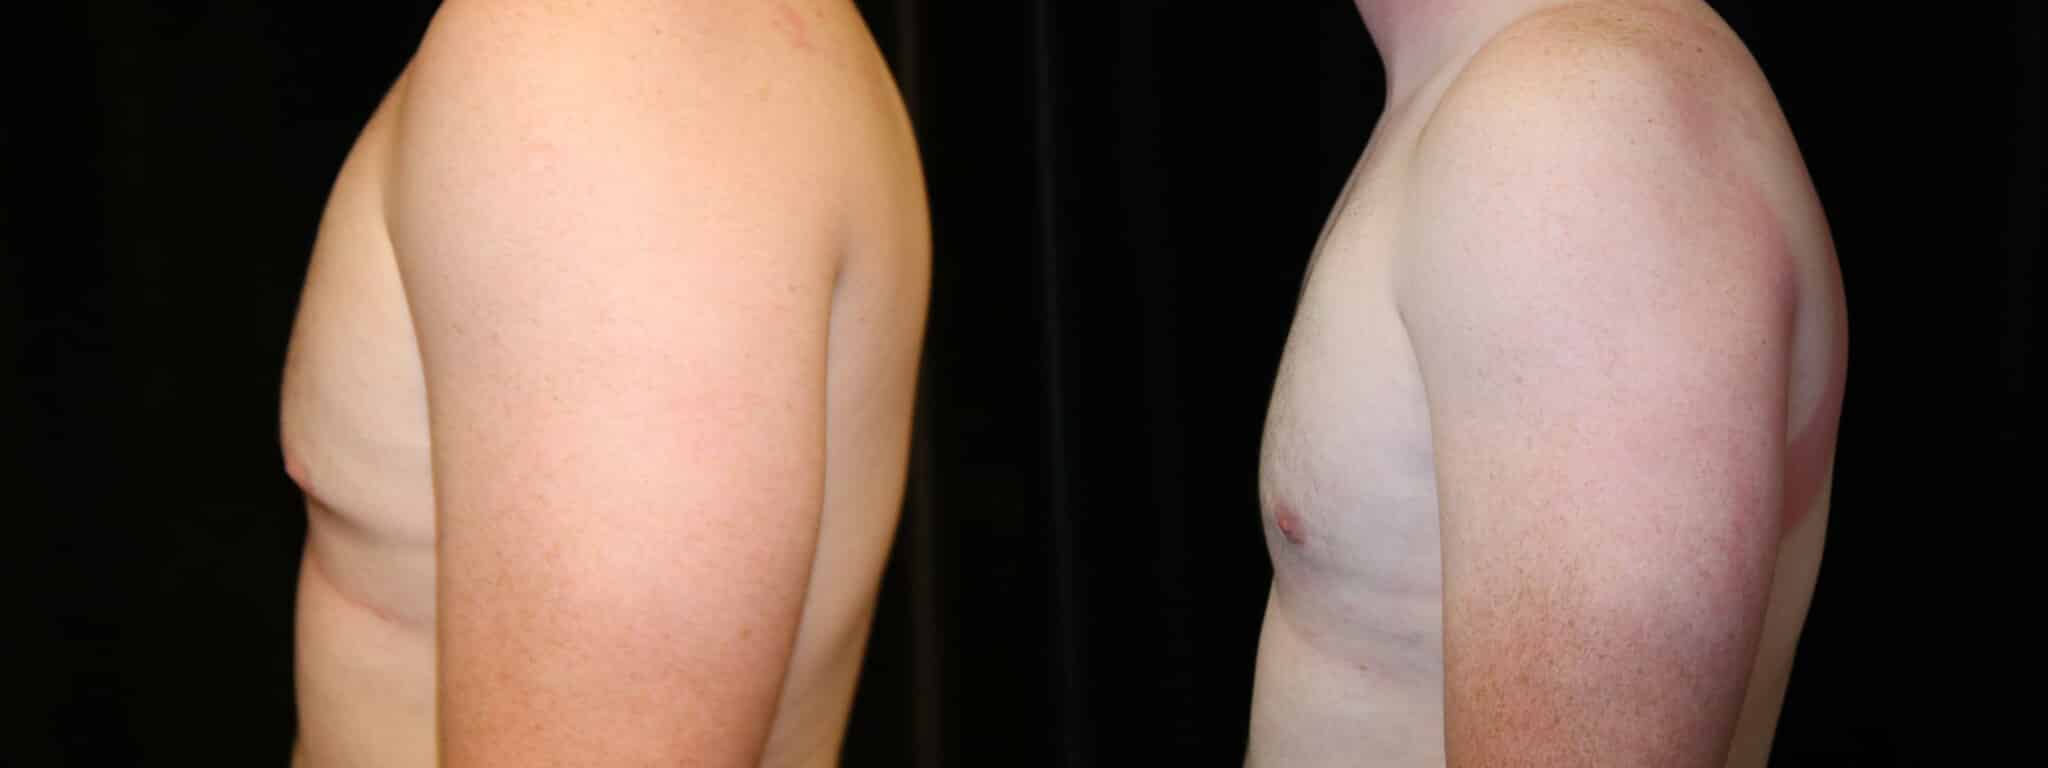 Gynecomastia Patient 17 Before & After Details